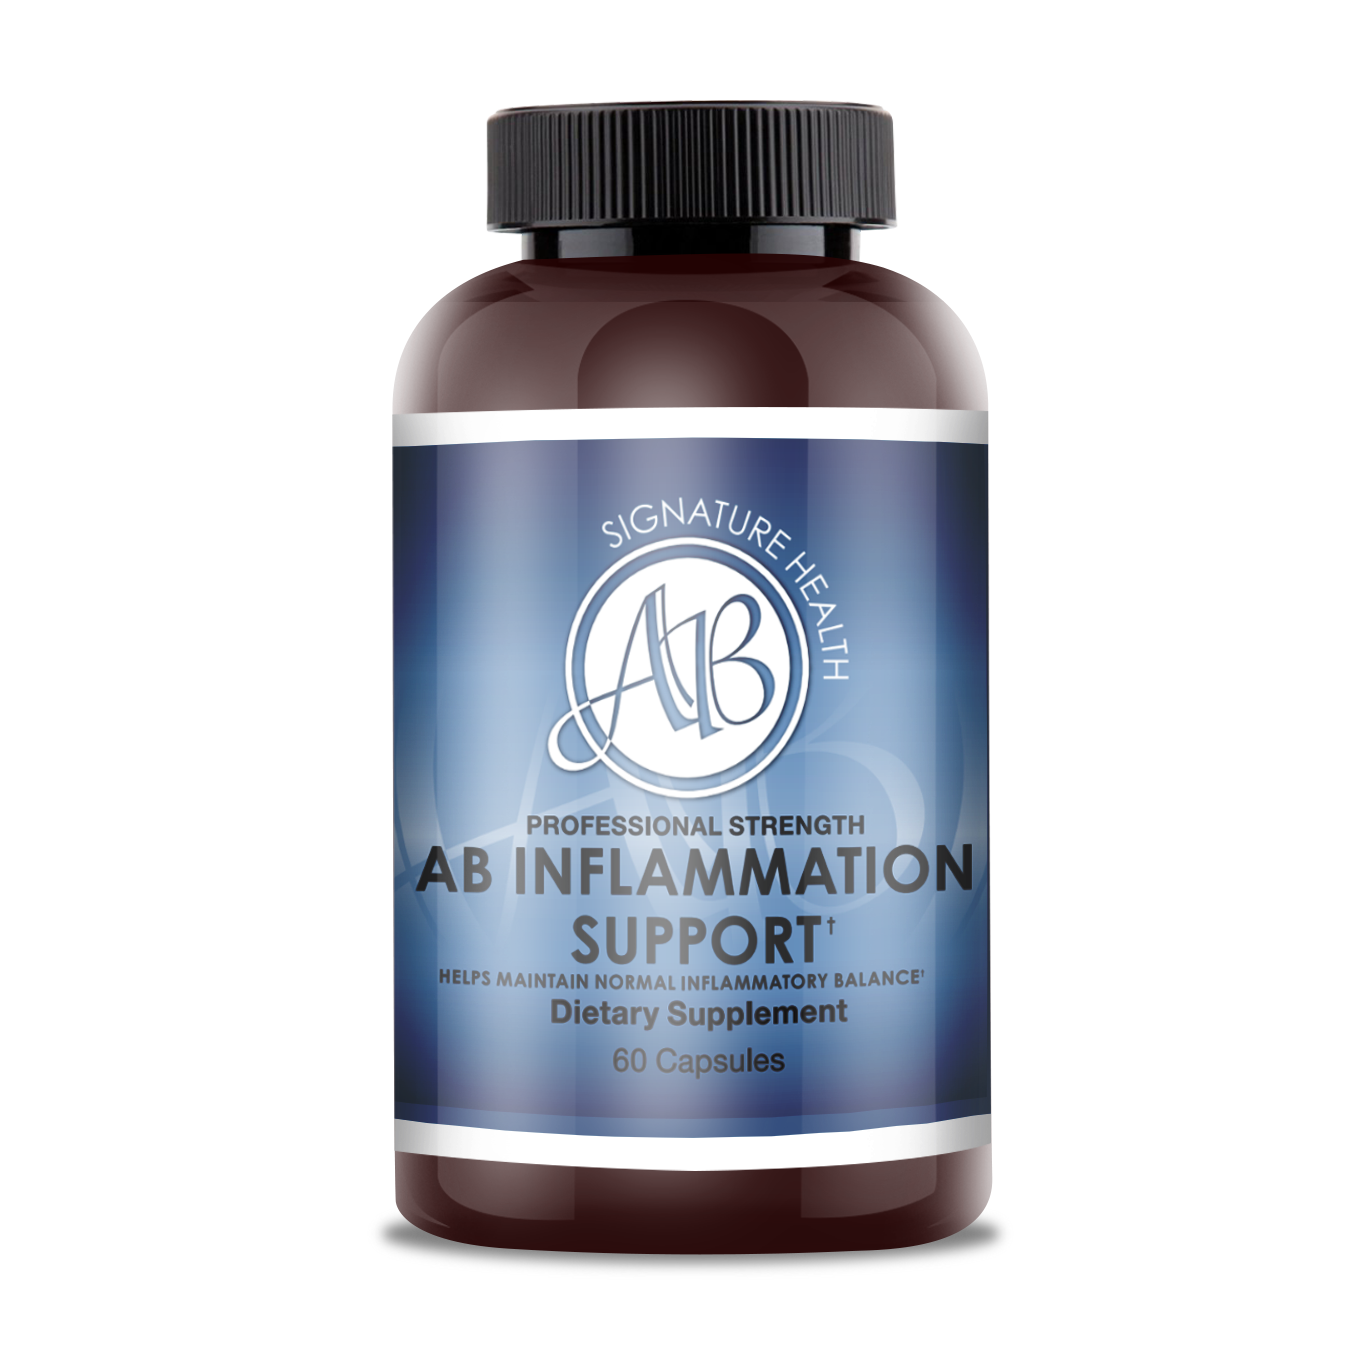 AB Inflammation Support